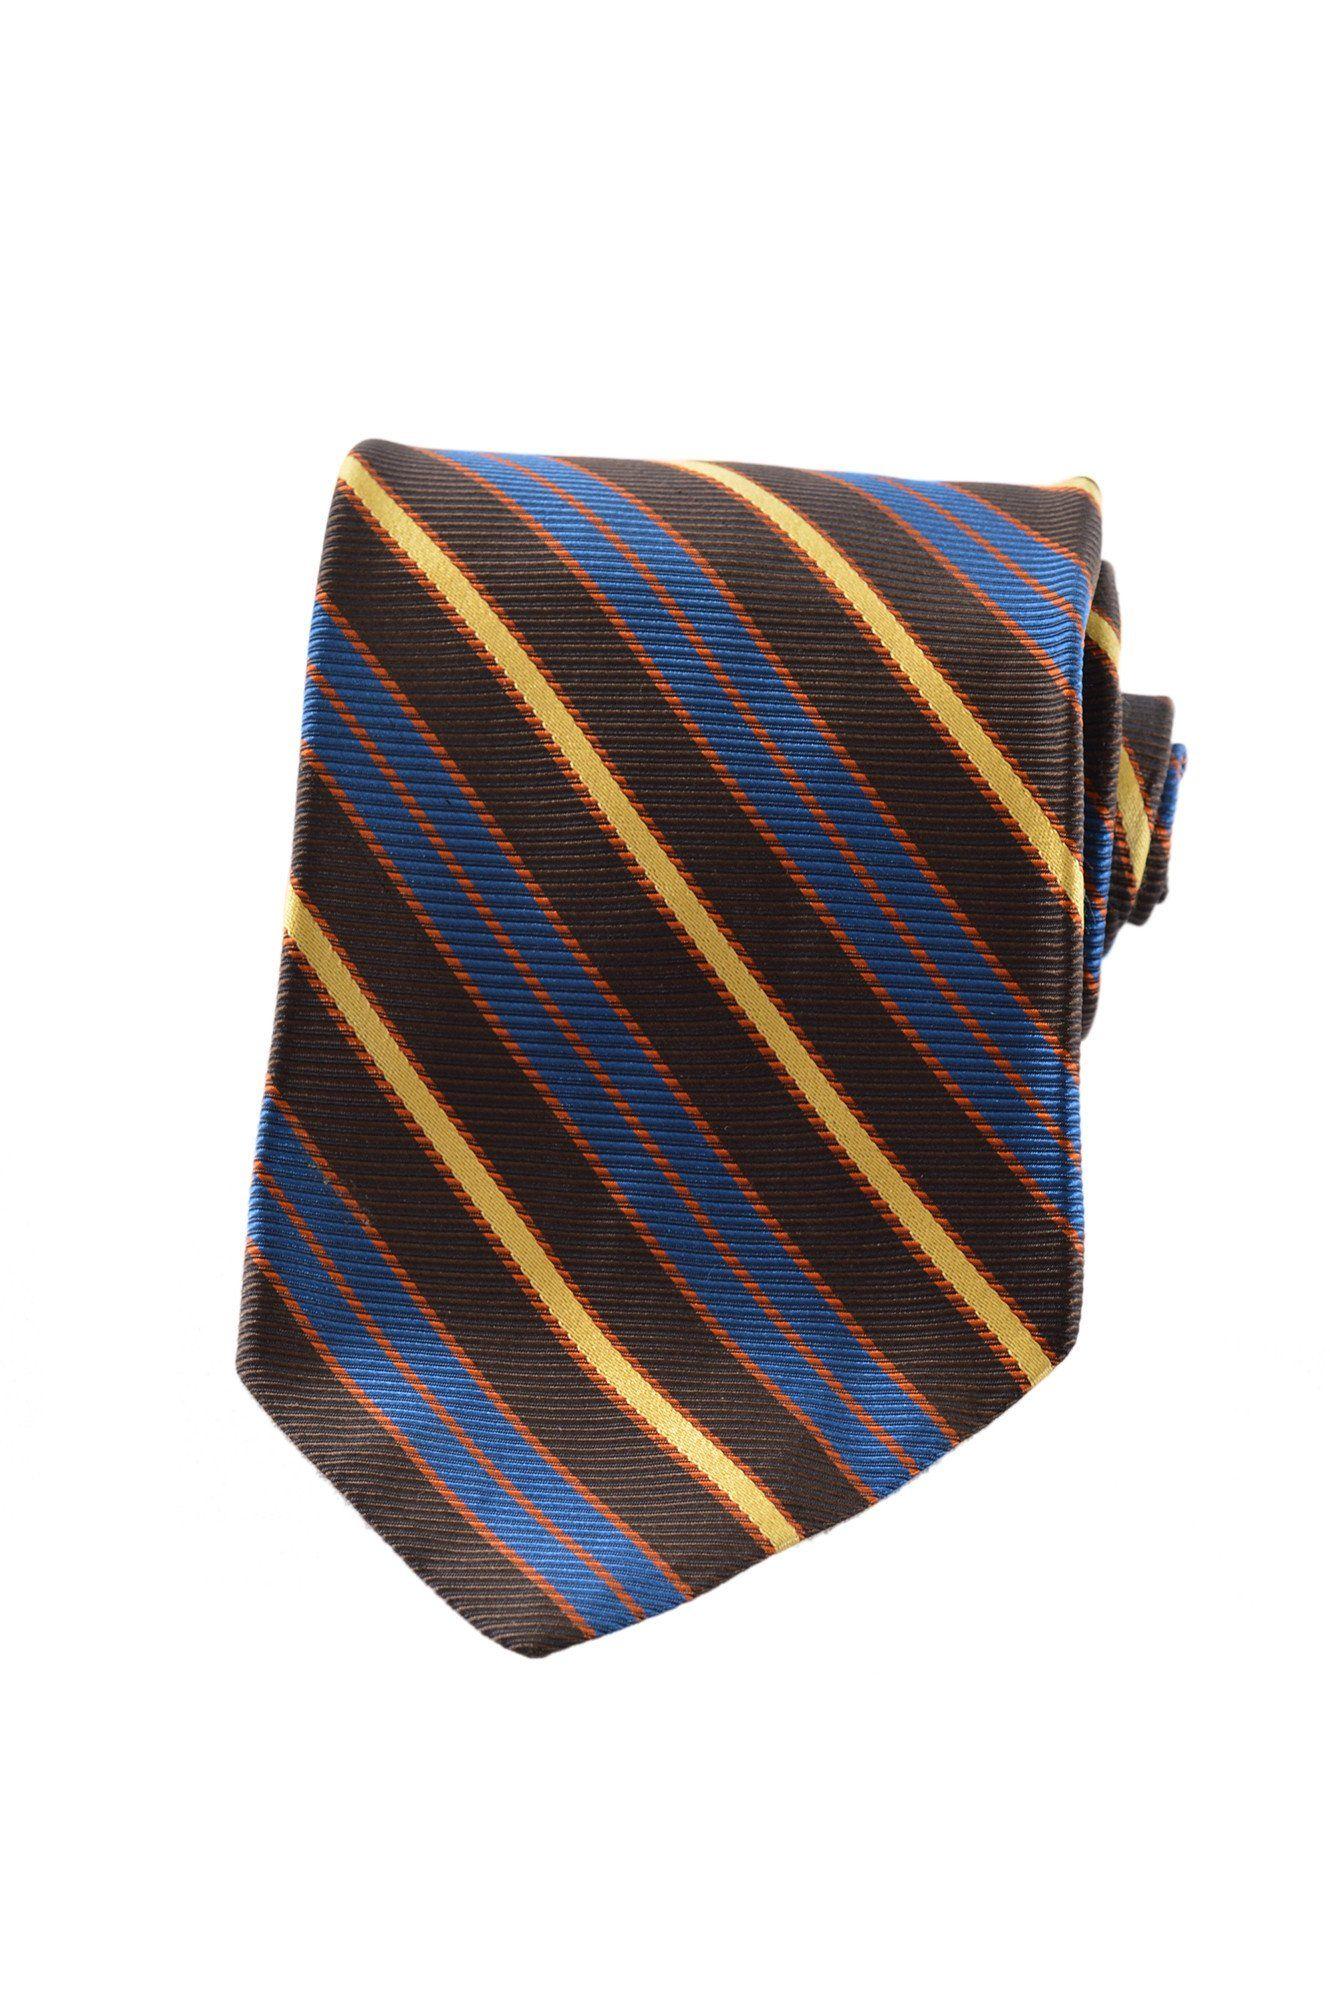 Striped Brown and Yellow Logo - Mens Christian Dior Vintage Brown Blue Yellow Striped Silk Tie